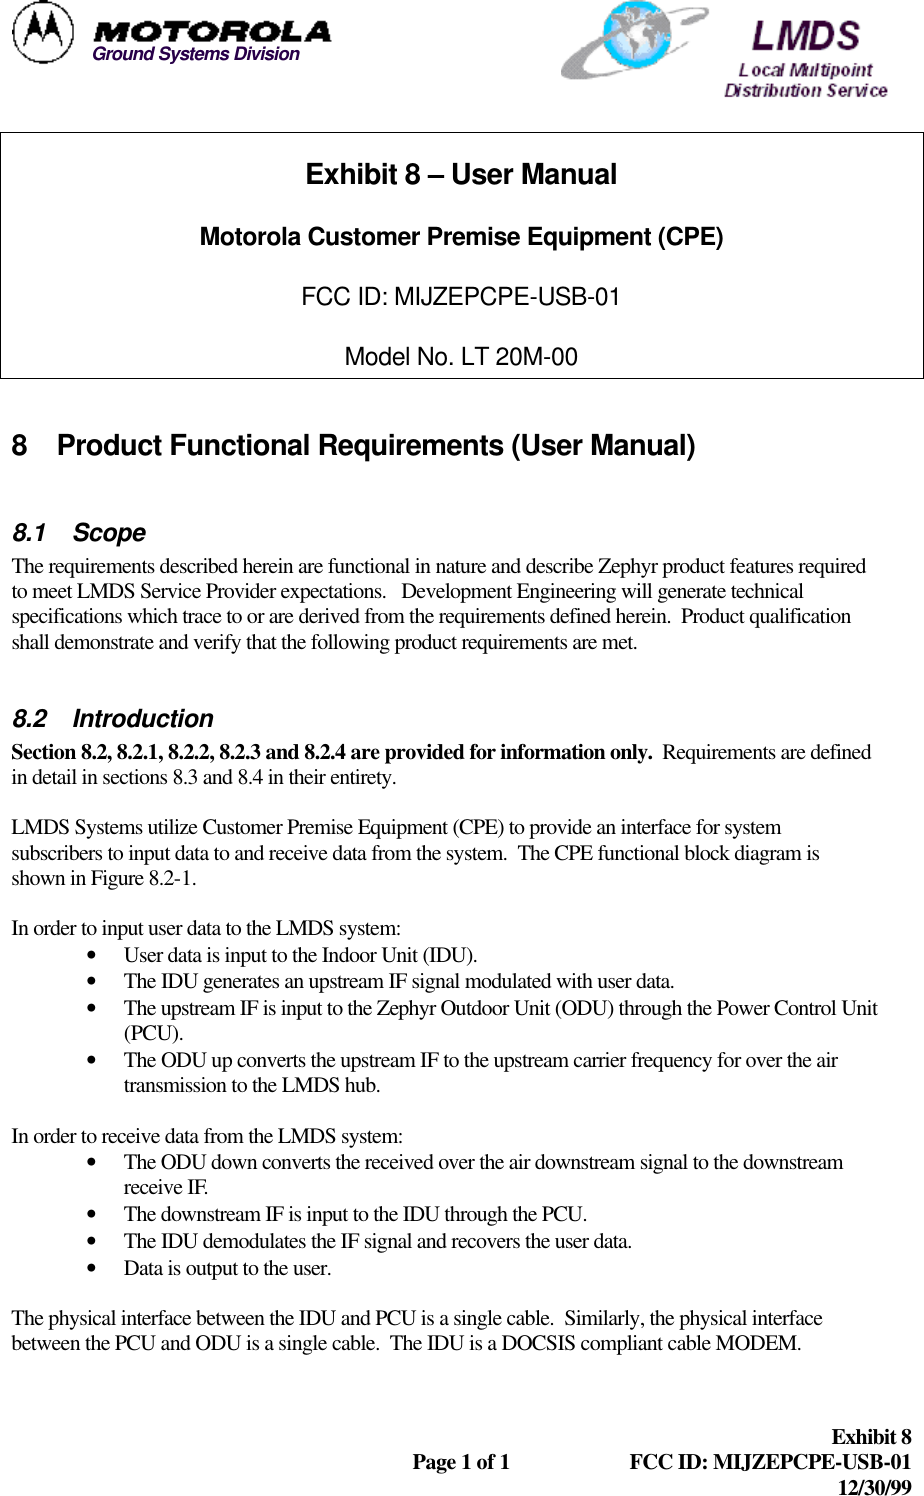  Exhibit 8  Page 1 of 1 FCC ID: MIJZEPCPE-USB-01 12/30/99  Ground Systems DivisionExhibit 8 – User Manual Motorola Customer Premise Equipment (CPE) FCC ID: MIJZEPCPE-USB-01 Model No. LT 20M-00  8 Product Functional Requirements (User Manual)  8.1 Scope The requirements described herein are functional in nature and describe Zephyr product features required to meet LMDS Service Provider expectations.   Development Engineering will generate technical specifications which trace to or are derived from the requirements defined herein.  Product qualification shall demonstrate and verify that the following product requirements are met.   8.2 Introduction Section 8.2, 8.2.1, 8.2.2, 8.2.3 and 8.2.4 are provided for information only.  Requirements are defined in detail in sections 8.3 and 8.4 in their entirety.   LMDS Systems utilize Customer Premise Equipment (CPE) to provide an interface for system subscribers to input data to and receive data from the system.  The CPE functional block diagram is shown in Figure 8.2-1.  In order to input user data to the LMDS system: • User data is input to the Indoor Unit (IDU). • The IDU generates an upstream IF signal modulated with user data. • The upstream IF is input to the Zephyr Outdoor Unit (ODU) through the Power Control Unit (PCU). • The ODU up converts the upstream IF to the upstream carrier frequency for over the air transmission to the LMDS hub.  In order to receive data from the LMDS system: • The ODU down converts the received over the air downstream signal to the downstream receive IF. • The downstream IF is input to the IDU through the PCU. • The IDU demodulates the IF signal and recovers the user data. • Data is output to the user.  The physical interface between the IDU and PCU is a single cable.  Similarly, the physical interface between the PCU and ODU is a single cable.  The IDU is a DOCSIS compliant cable MODEM. 